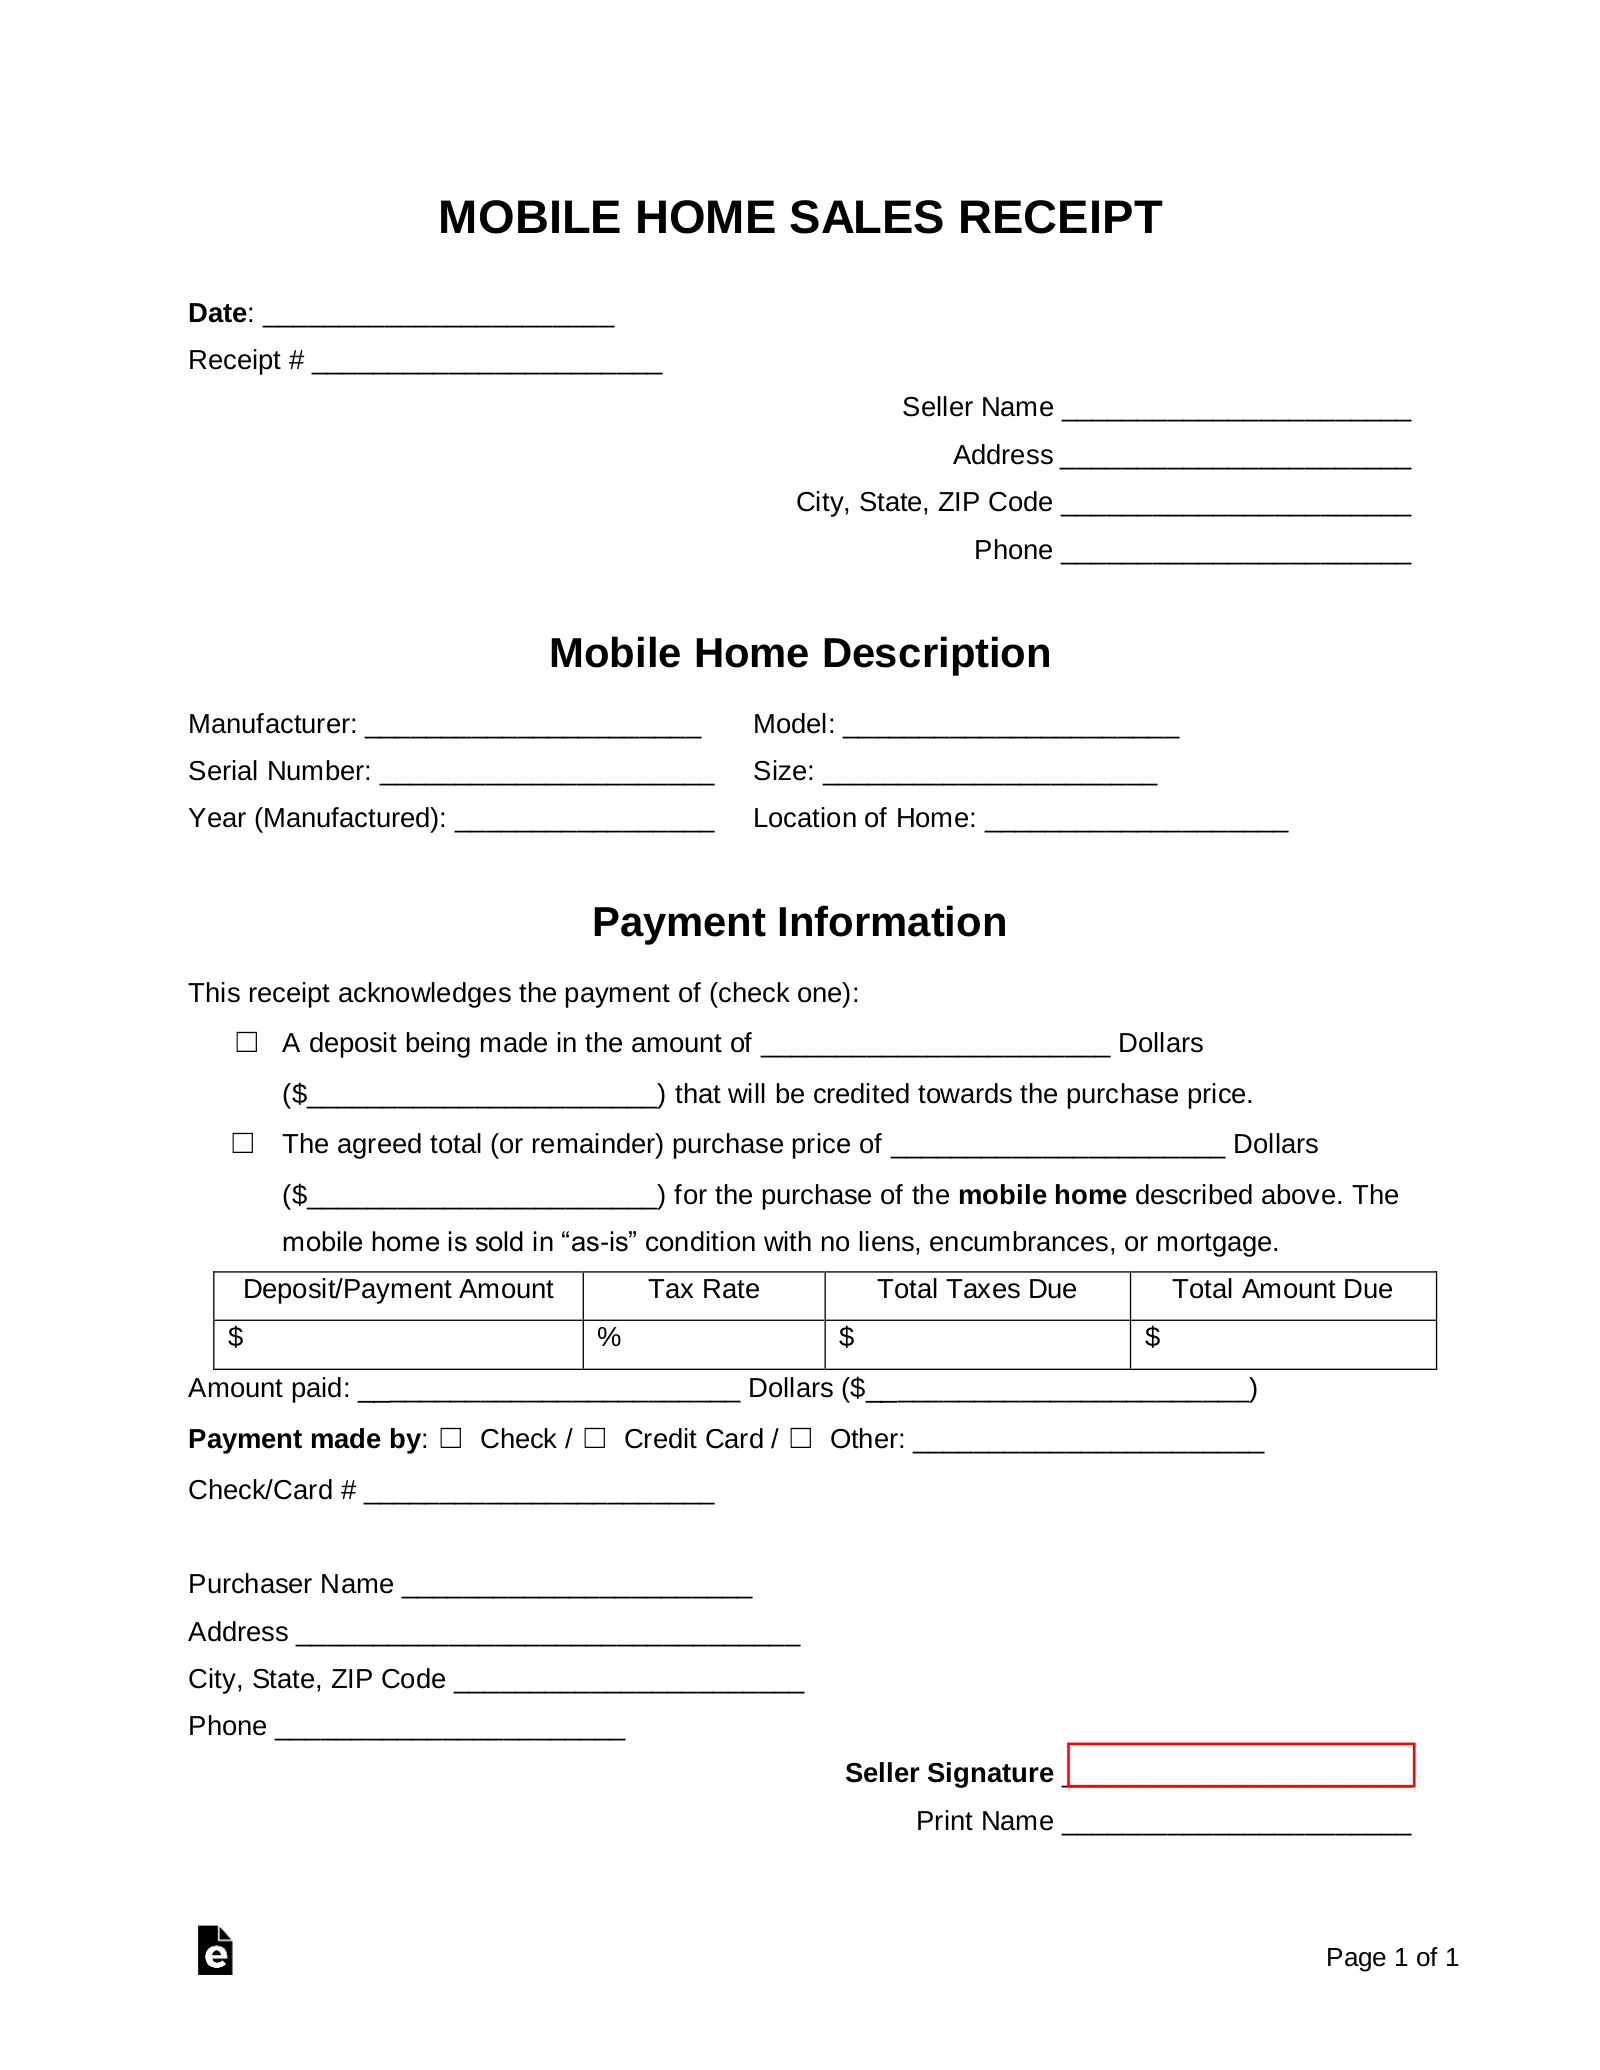 Mobile Home Purchase Agreement Template